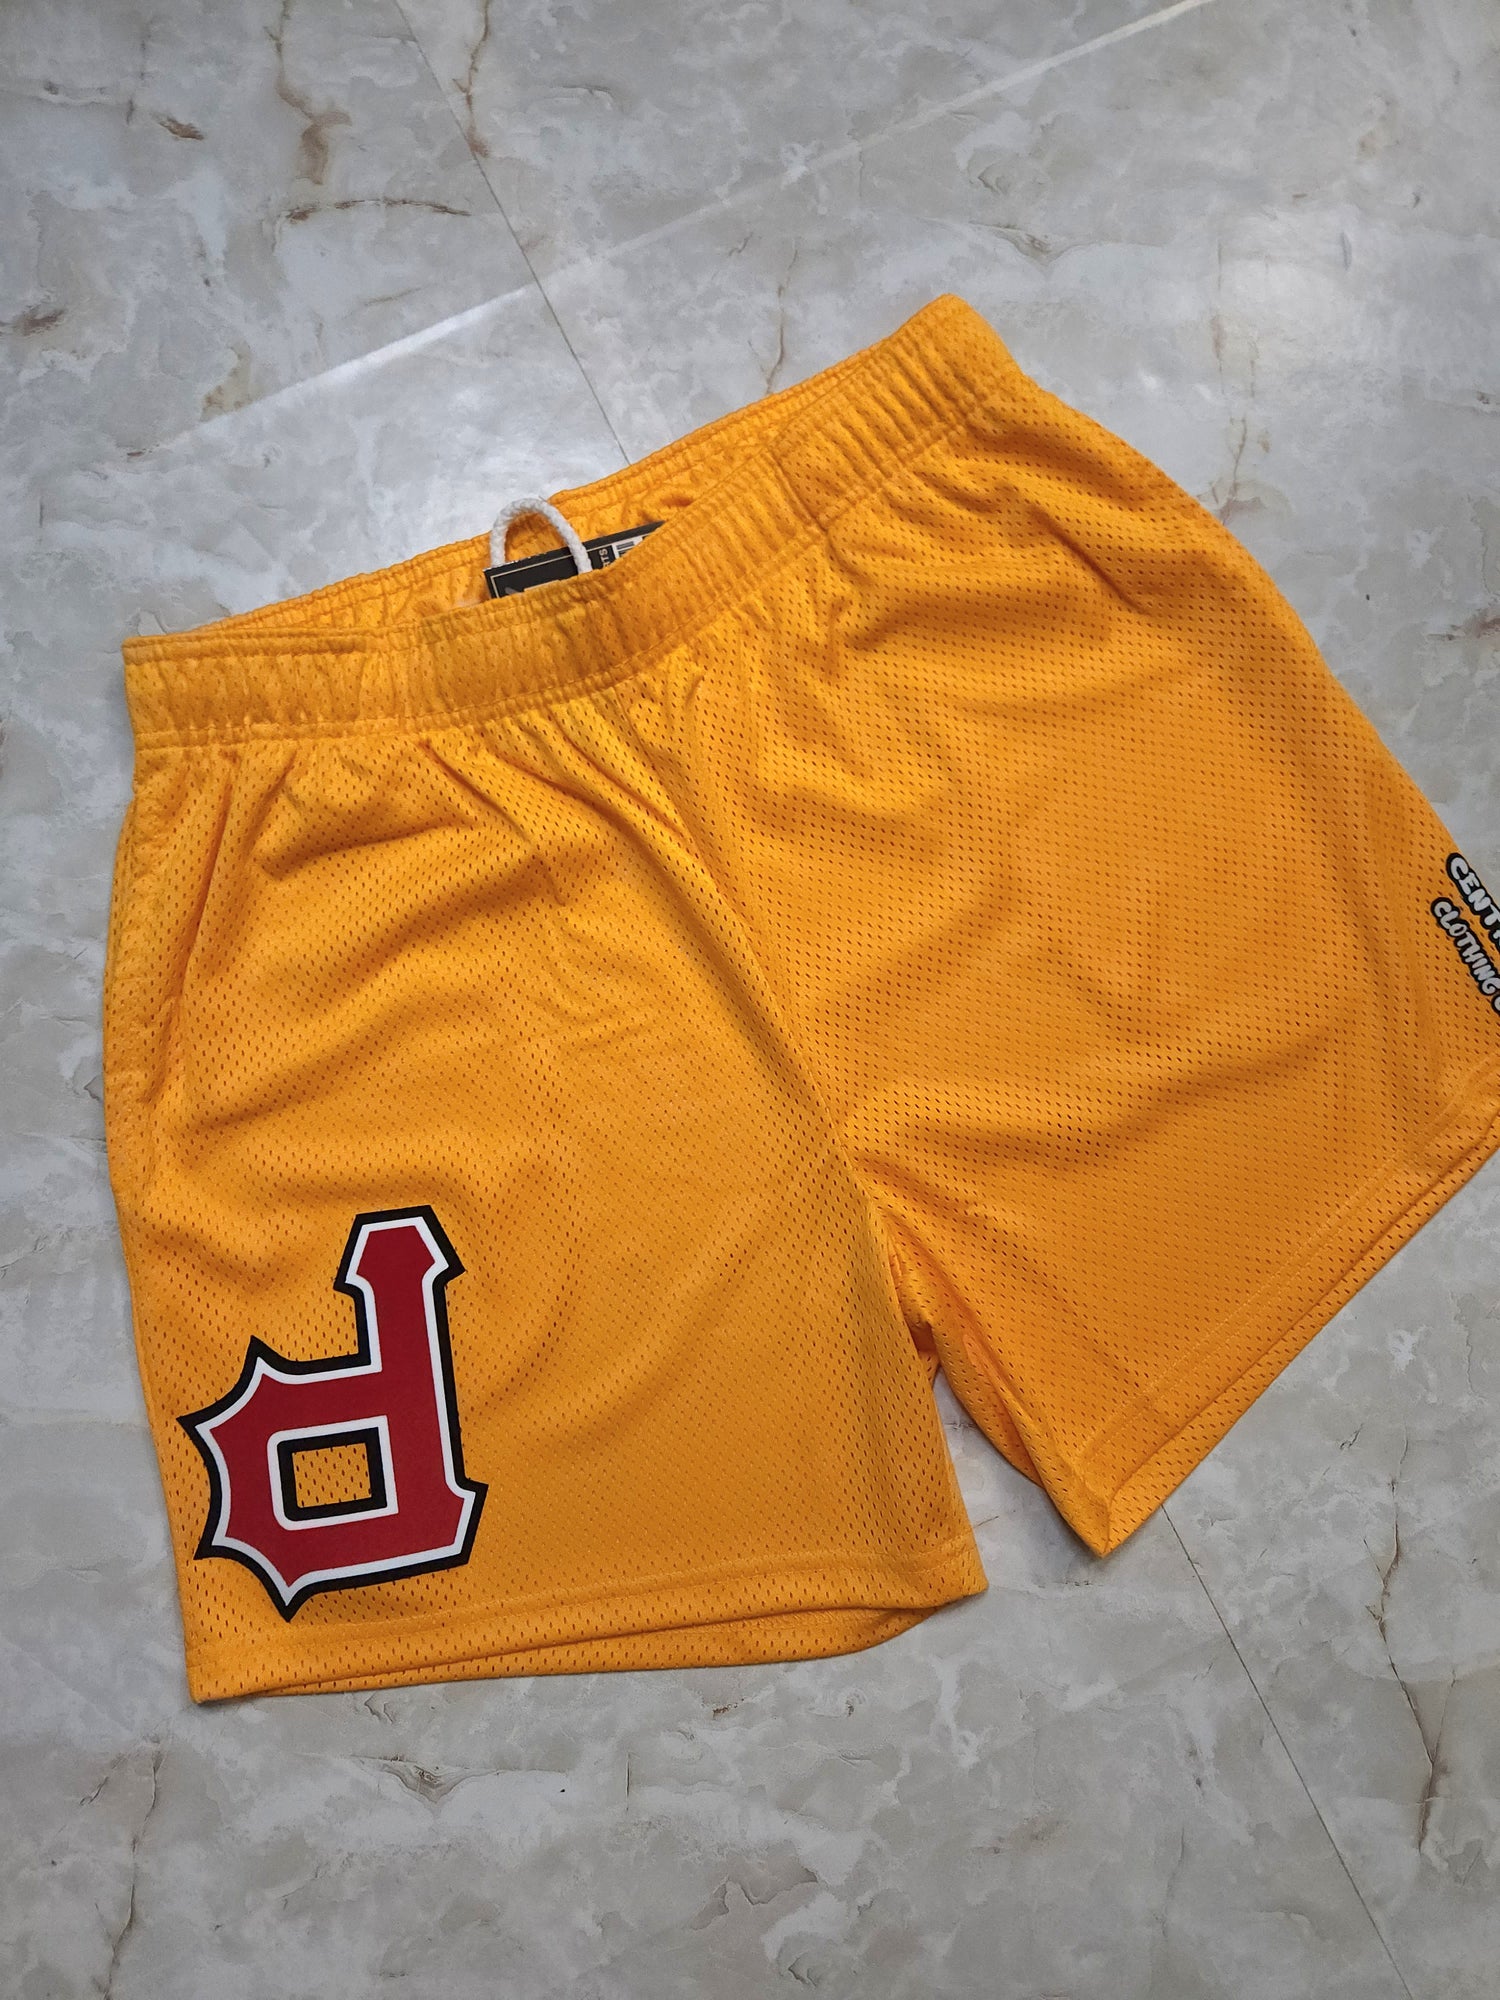 Pirates Mesh Shorts - Centre Ave Clothing Co.